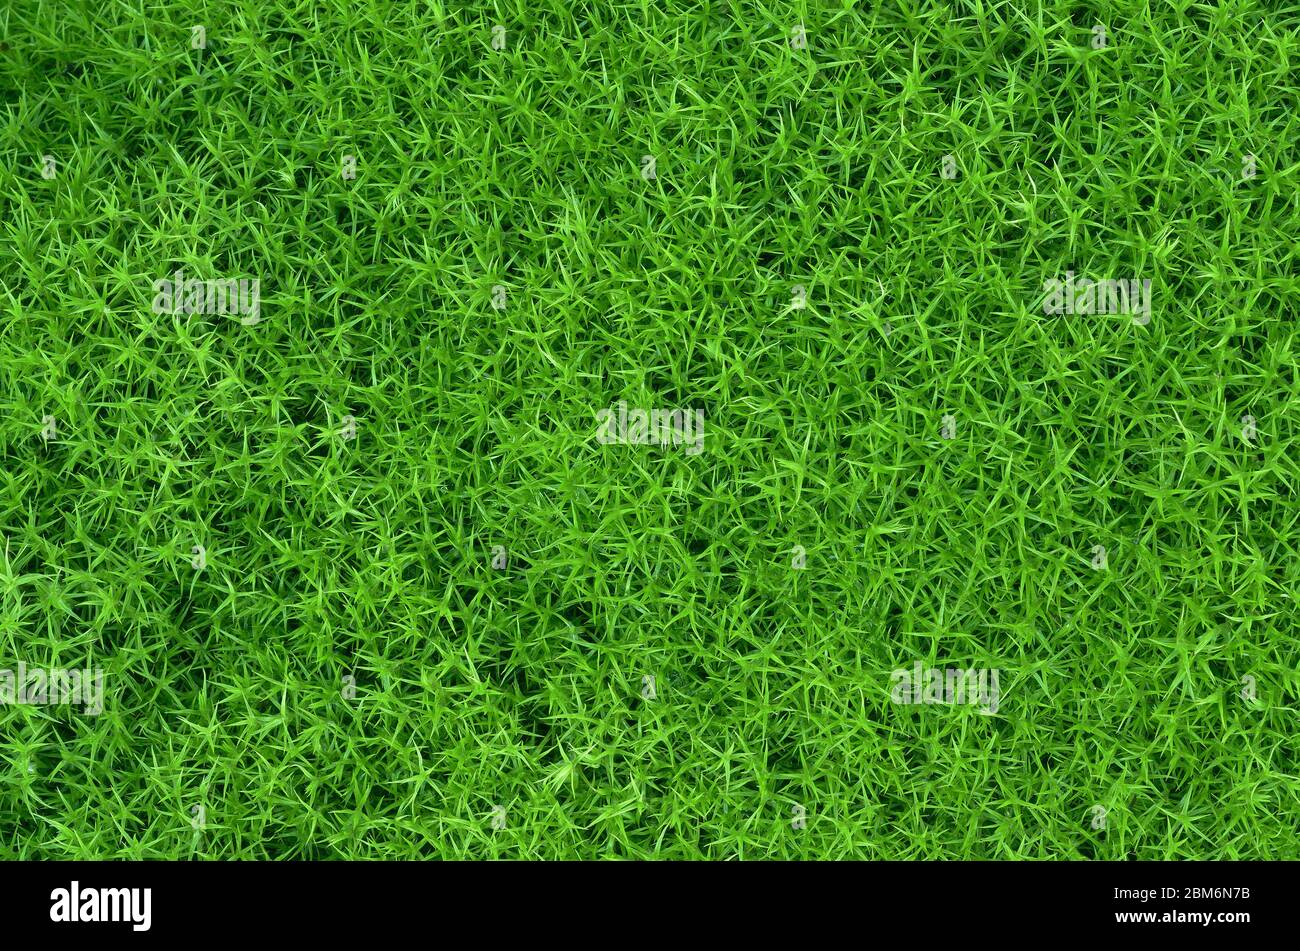 Abstract texture of green moss Stock Photo